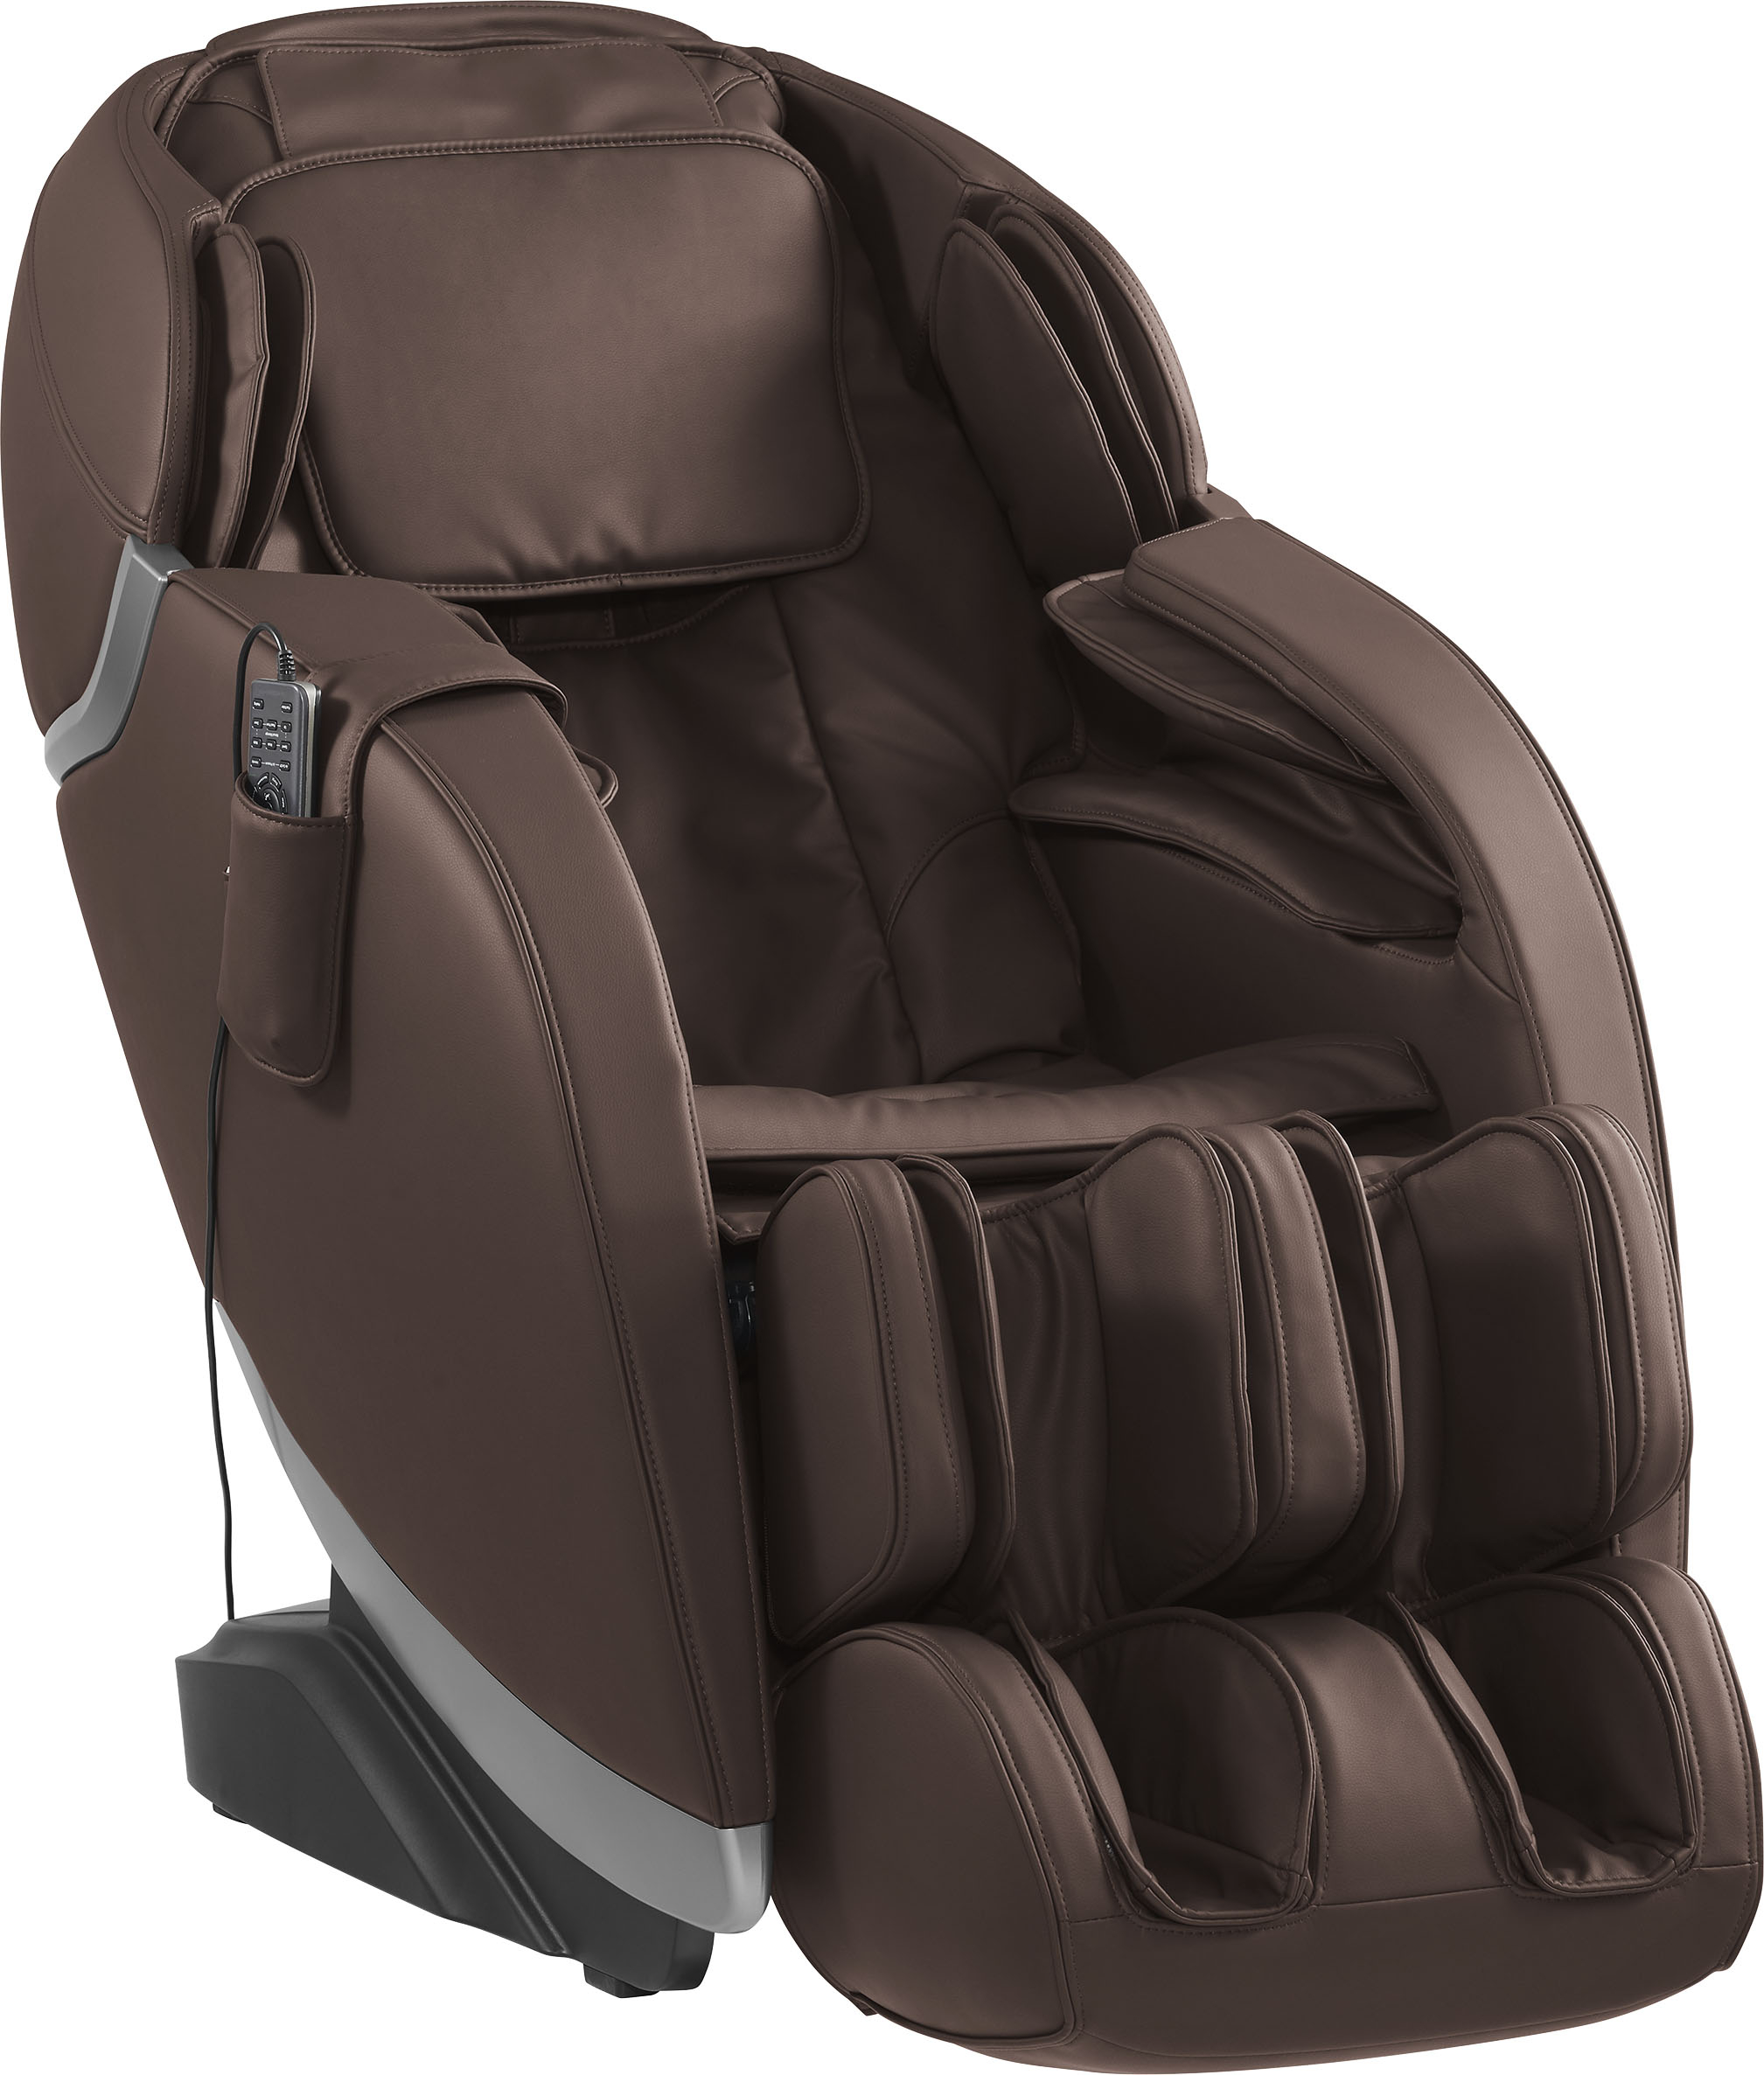 Angle View: Insignia™ - 2D Zero Gravity Full Body Massage Chair - brown with silver trim